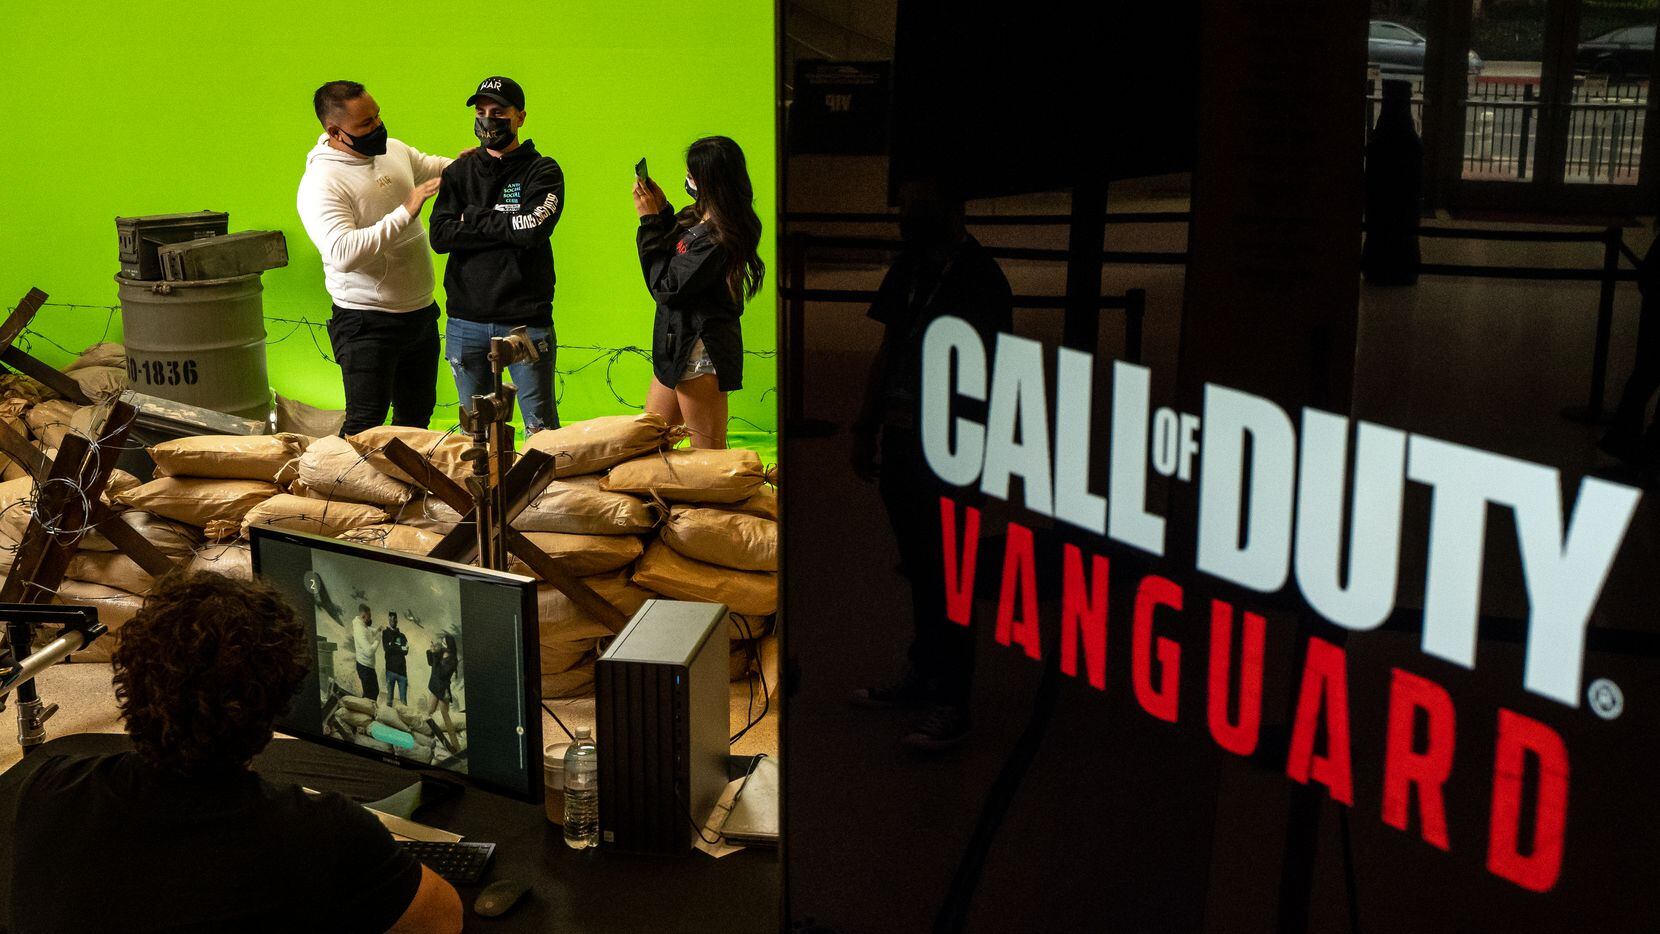 From left: Christian Bourdeax pretends to dust off Kevin Pichardo as Malee Mabandit takes a photo in a Call of Duty green screen booth to advertise the next game in the franchise, Call of Duty: Vanguard, on the final day of the Call of Duty league playoffs championship round on Aug. 22 at the Galen Center in Los Angeles.